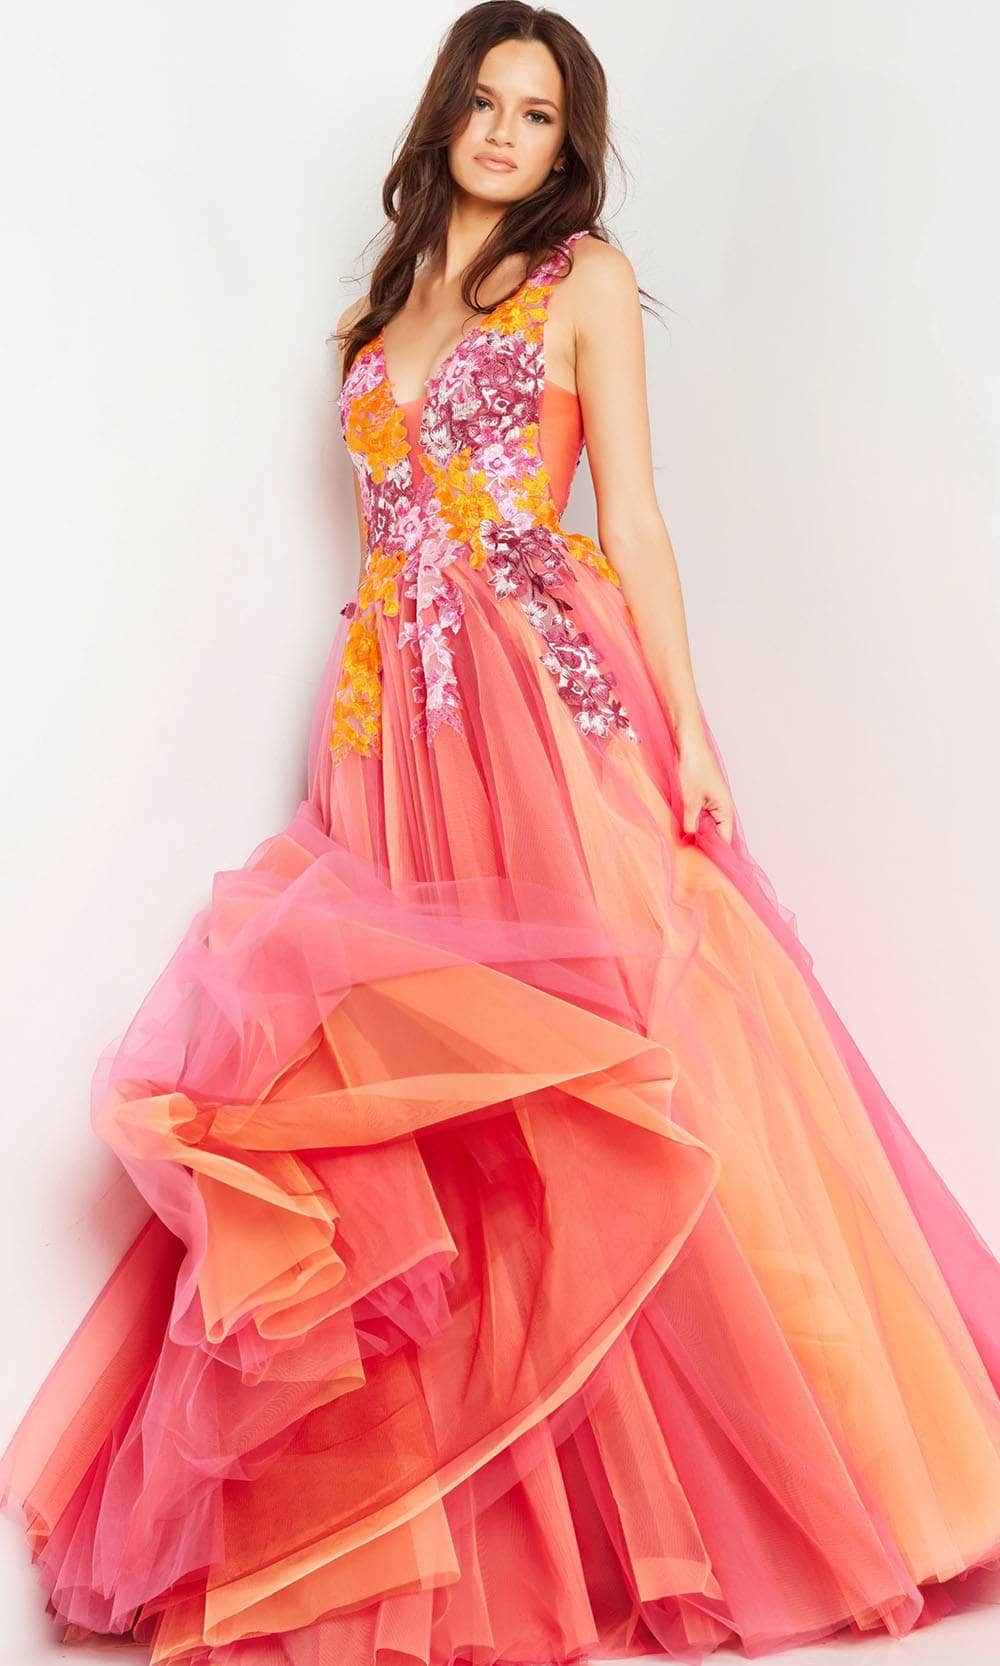 Jovani 25800 - Sleeveless Floral Embroidered Ballgown Special Occasion Dresses